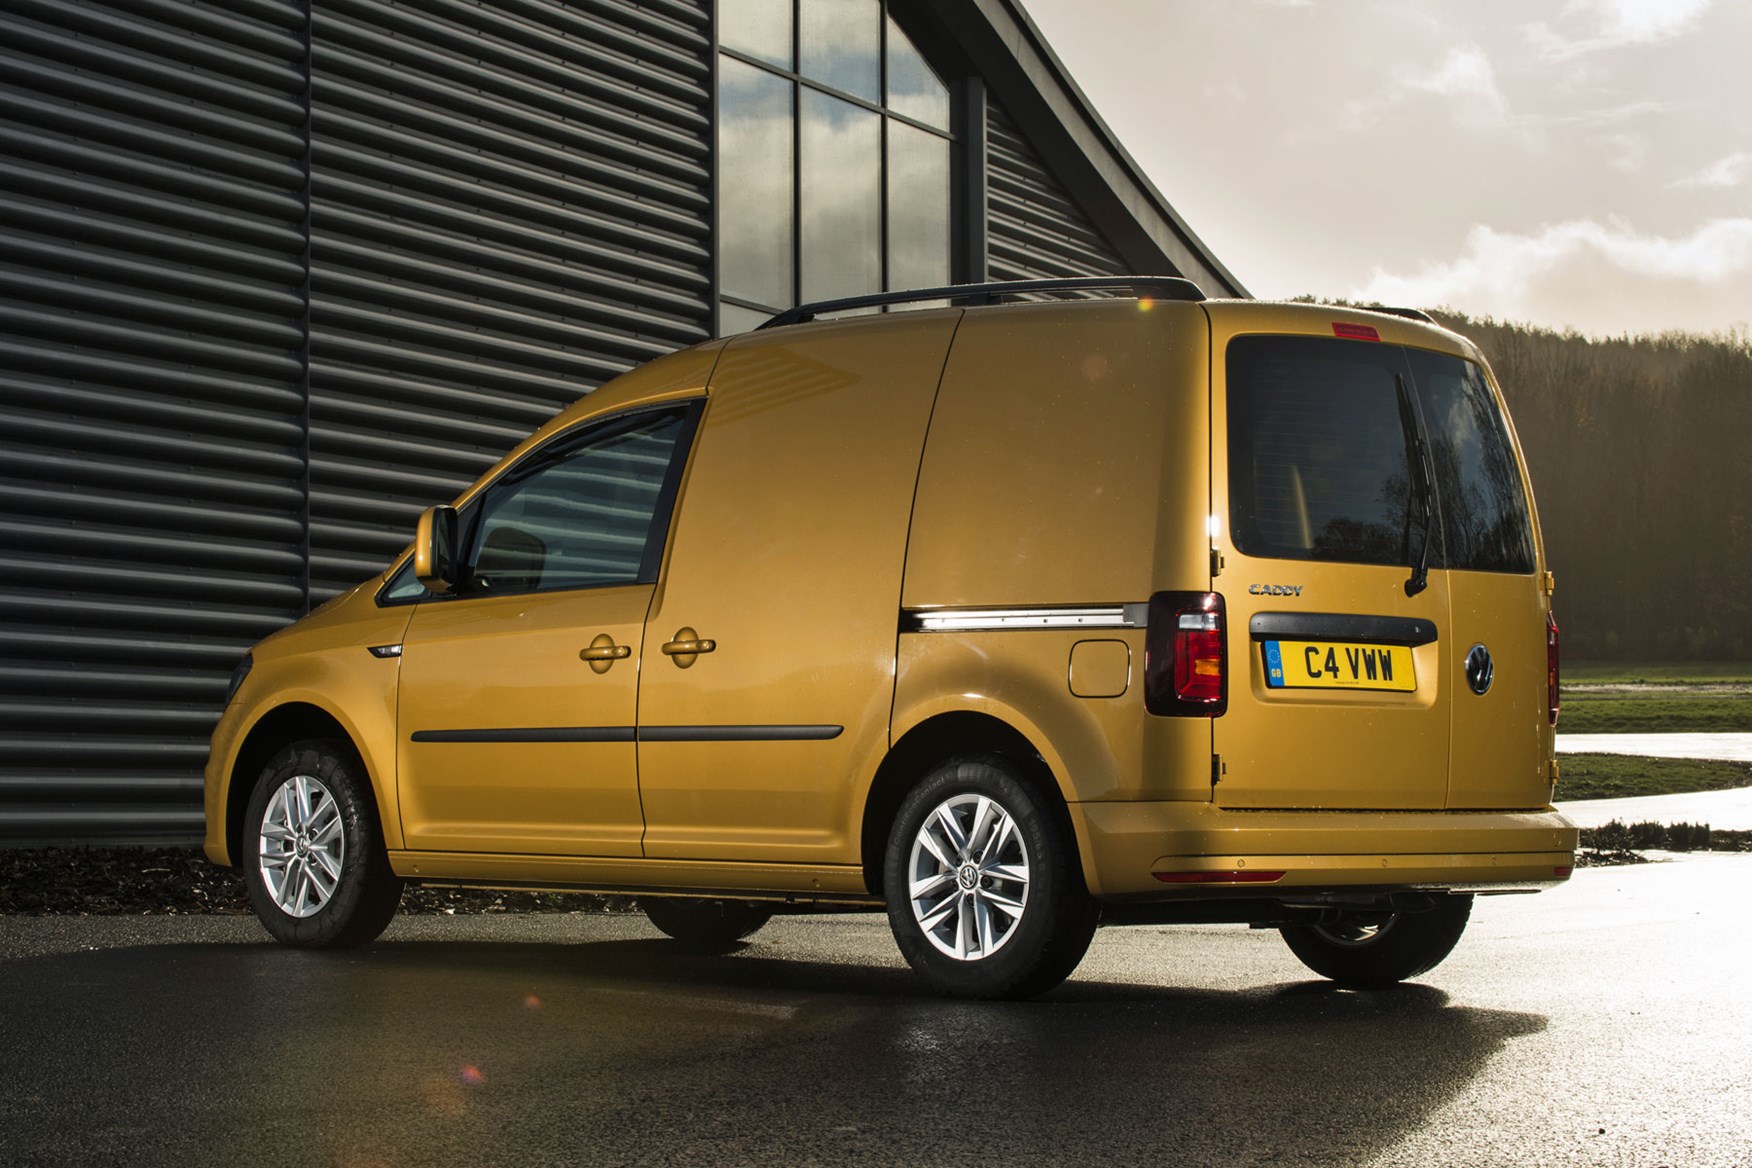 VW Caddy 2018 review